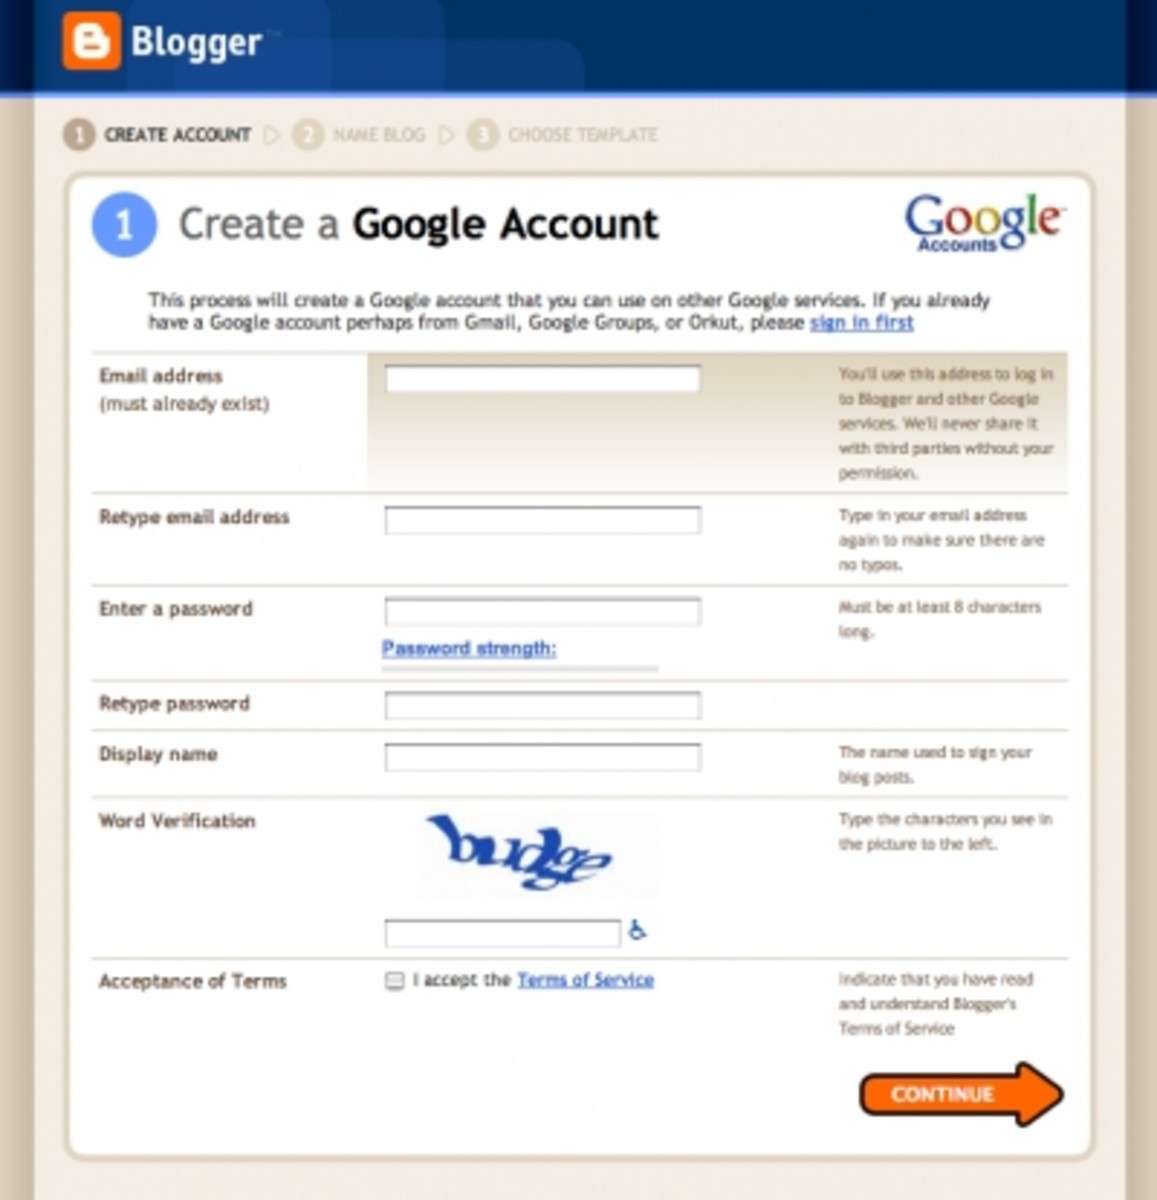 Get started by setting up your Blogger account